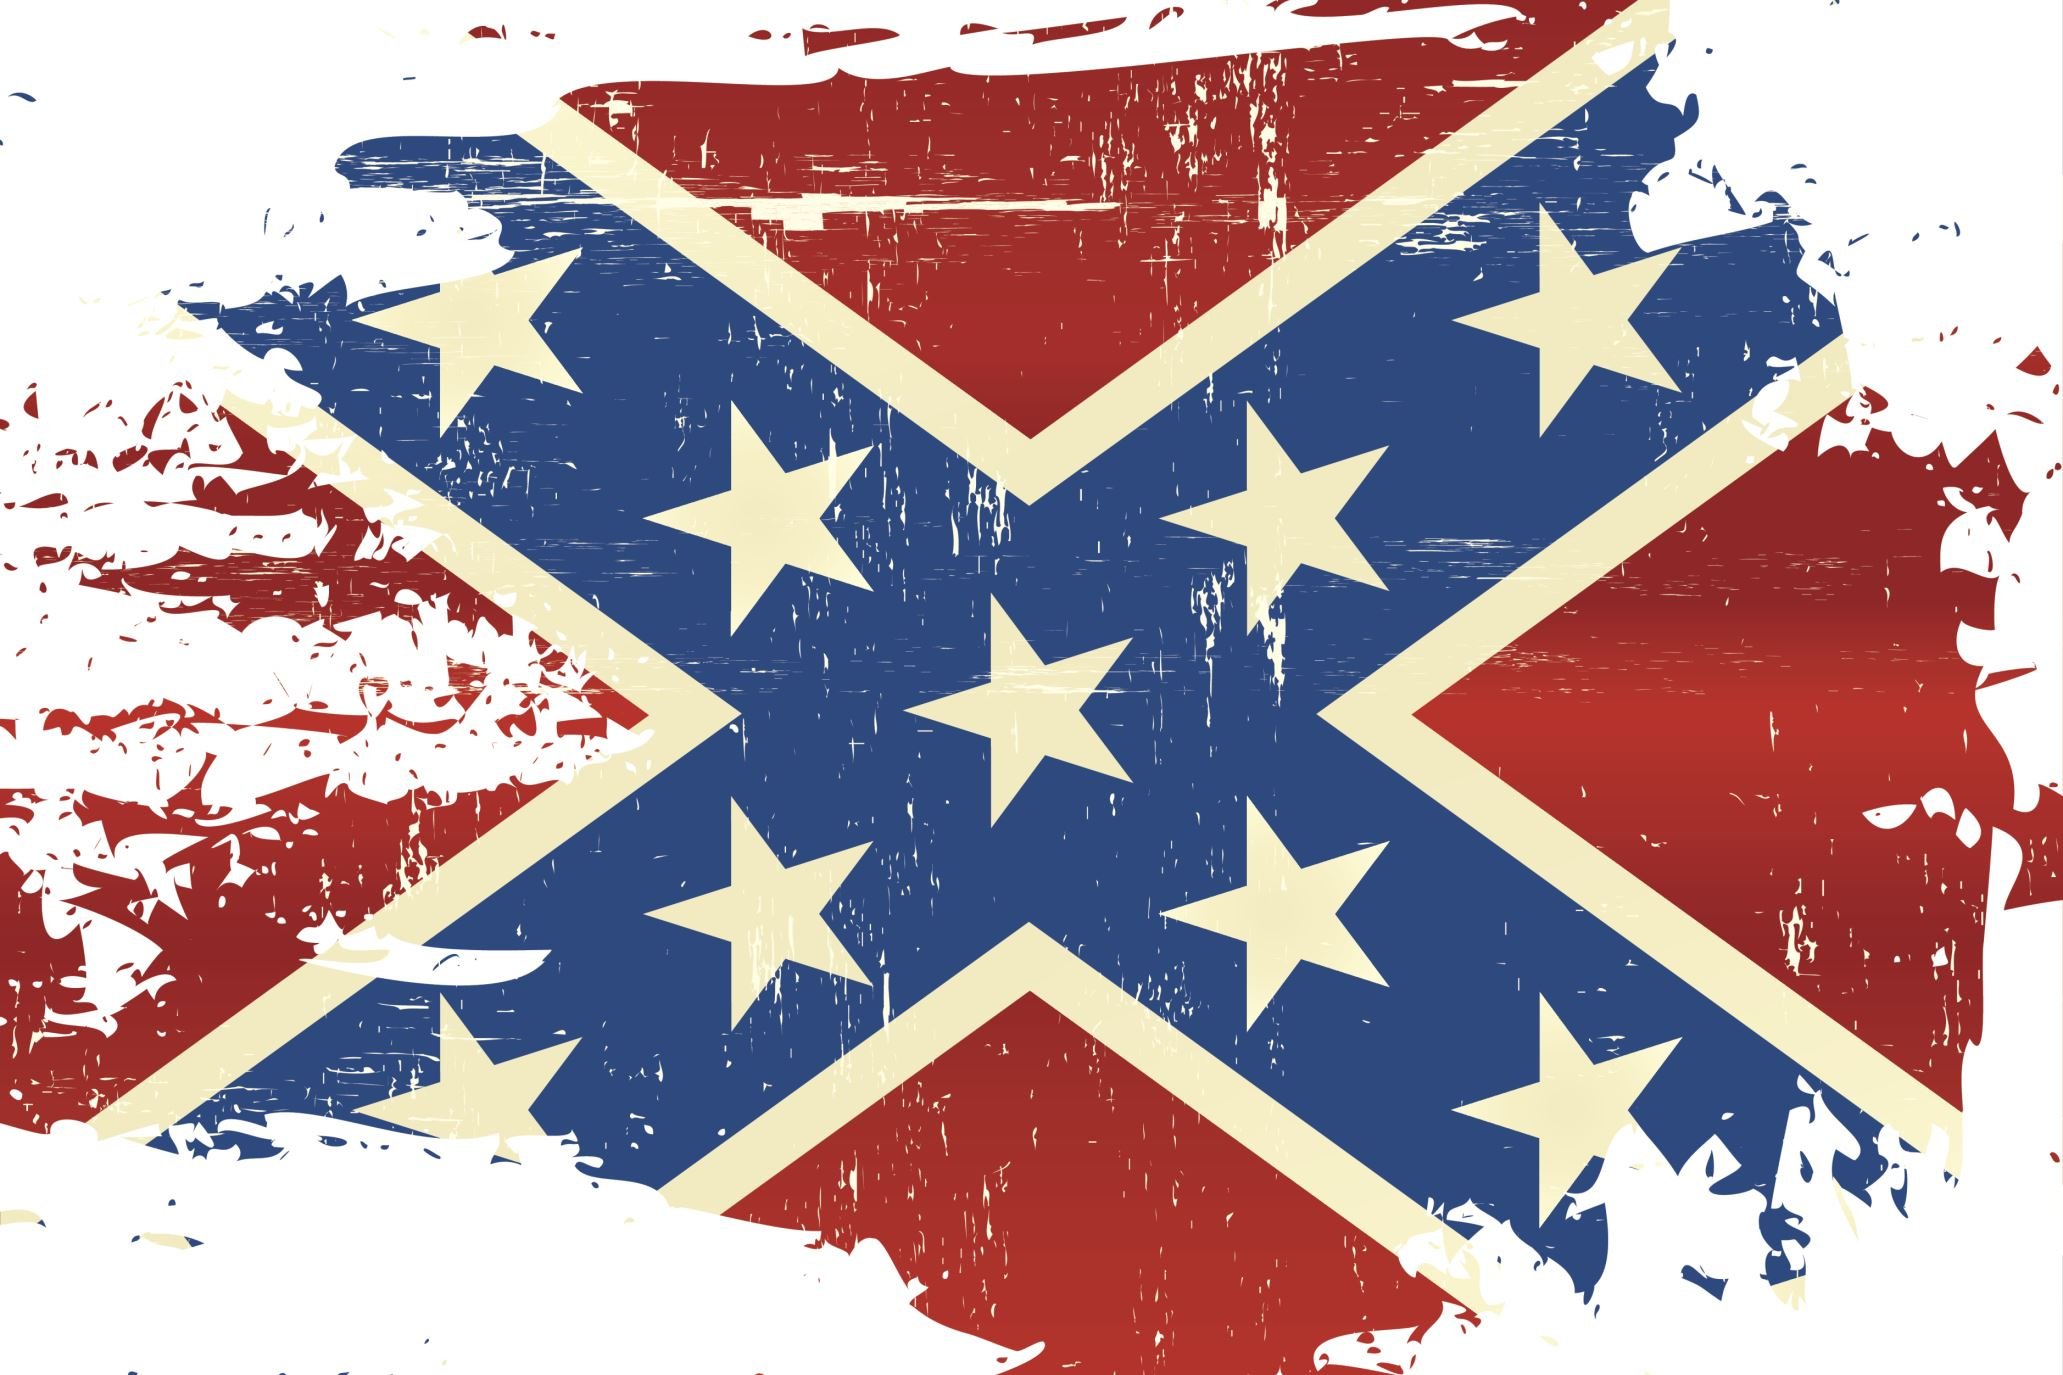 Rebel Flag Wallpapers Wallpapers, Backgrounds, Images, Art Photos